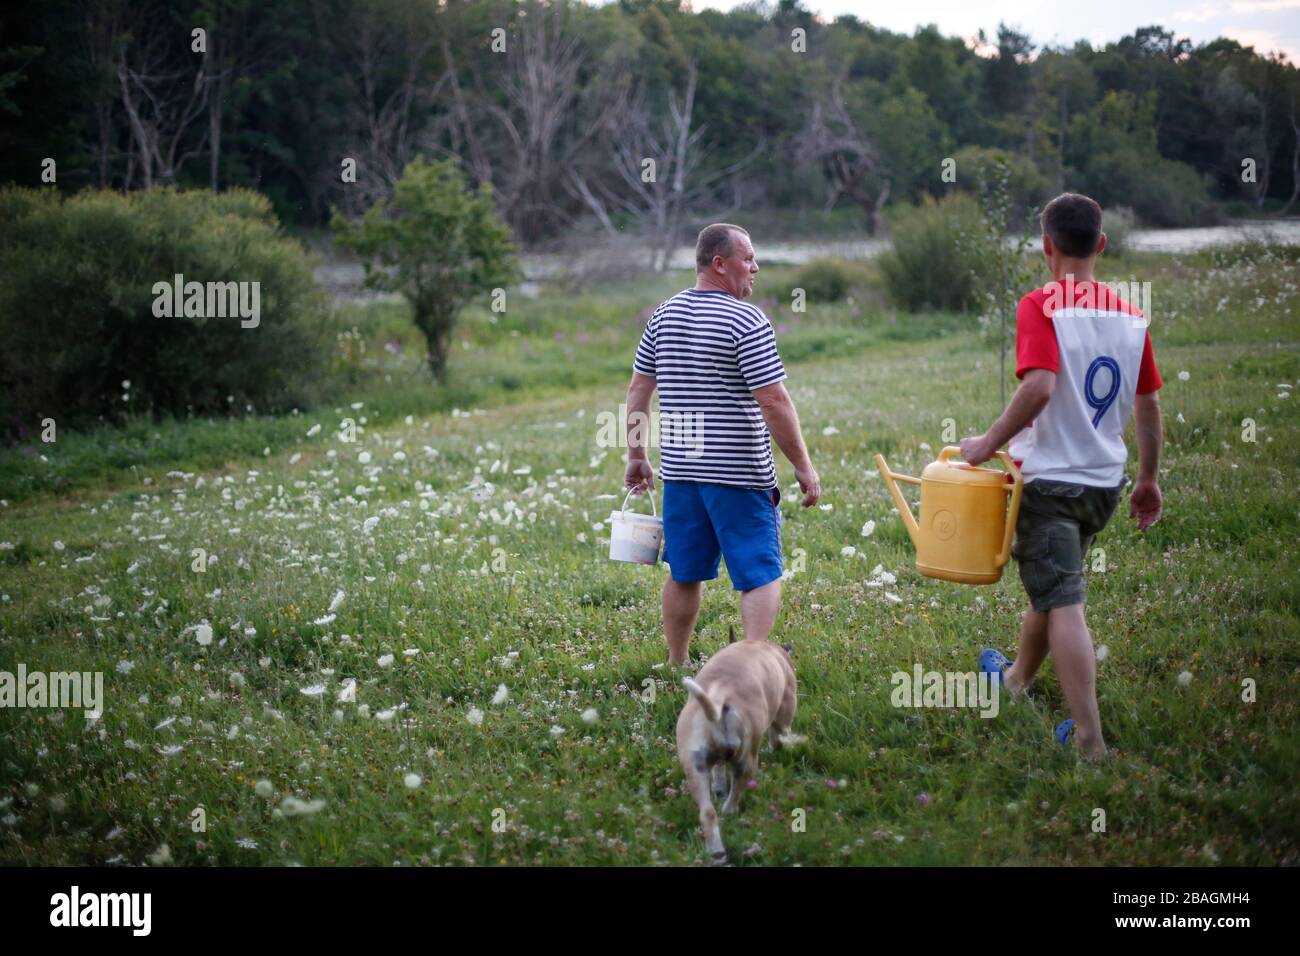 Heading Out to Go Fishing by a River in Rural Croatia Stock Photo